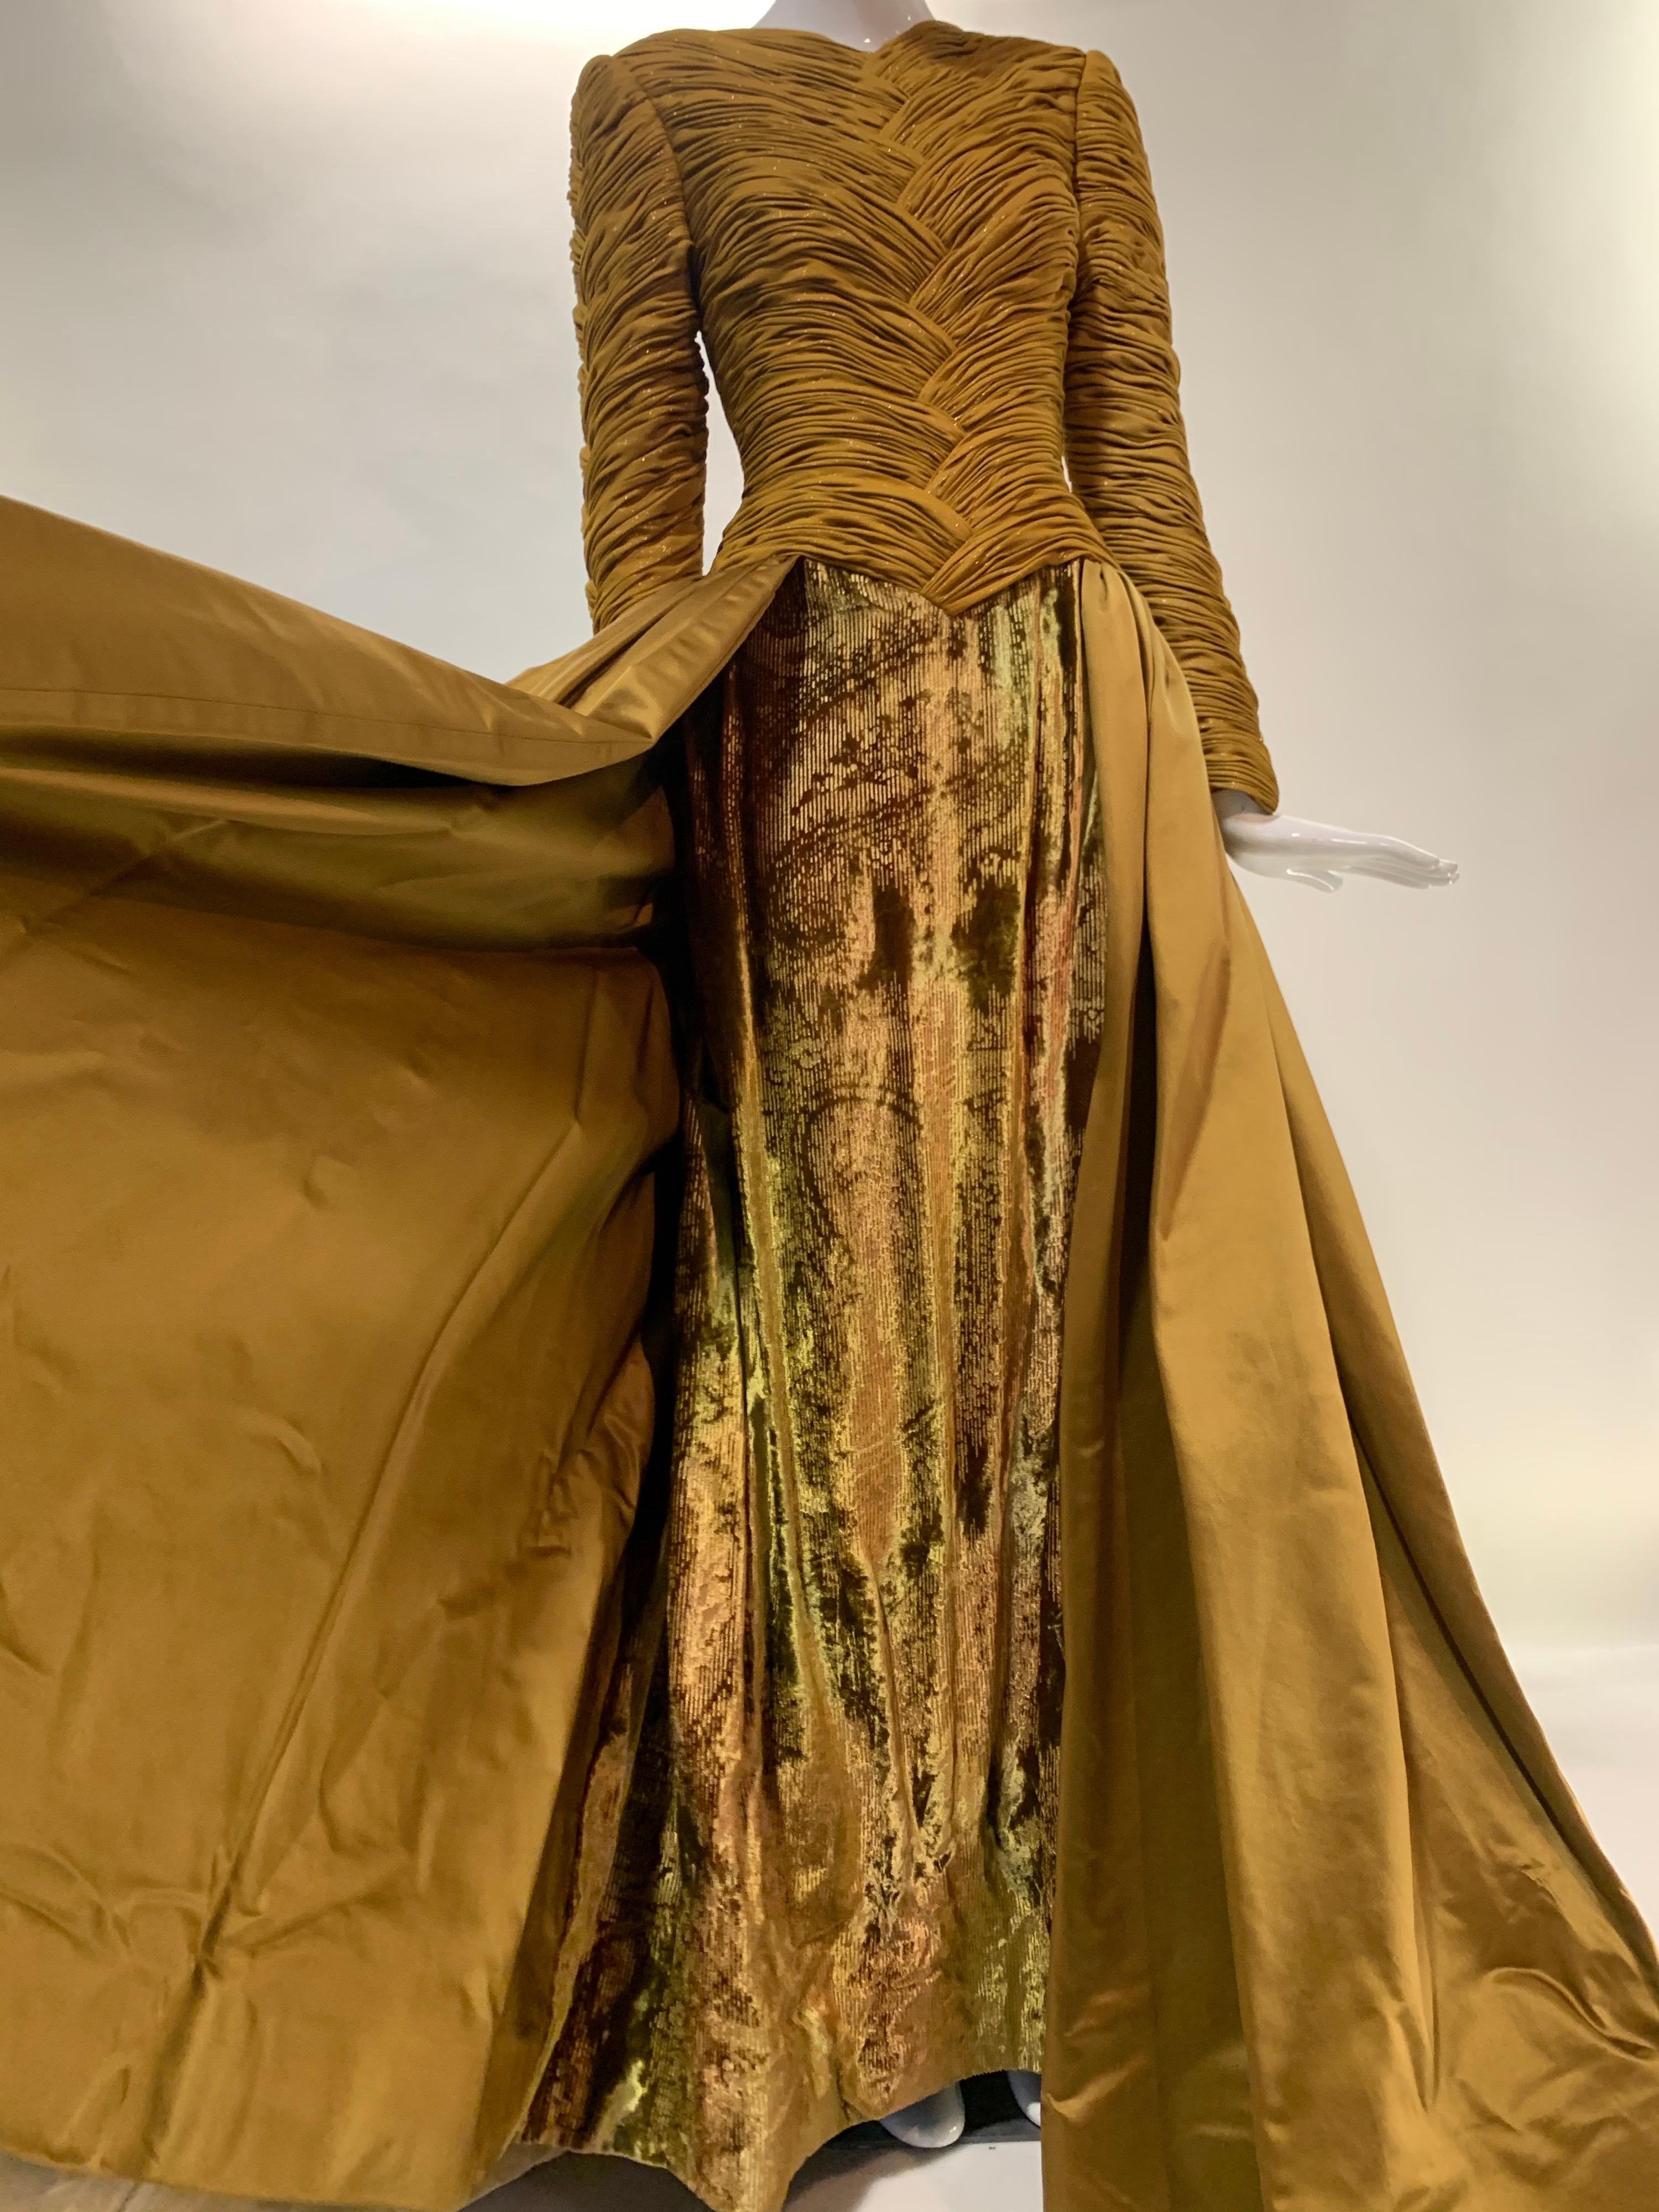 1990s Demi-Couture Gold Silk Ball Gown w/ Velvet Sheath & Dramatic Satin Skirt  For Sale 1